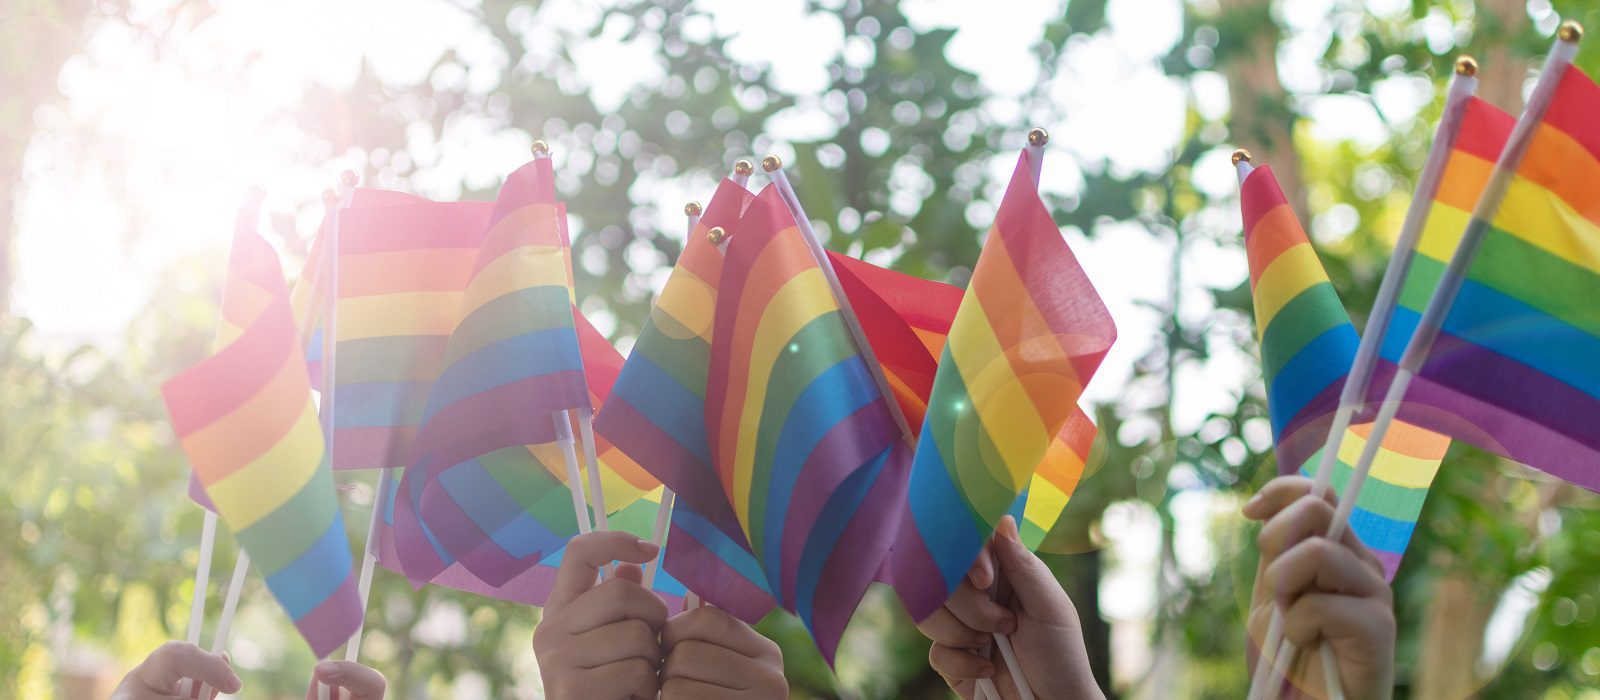 LGBT, pride, rainbow flag as a symbol of lesbian, gay, bisexual, transgender, and queer pride and LGBTQ social movements in June month